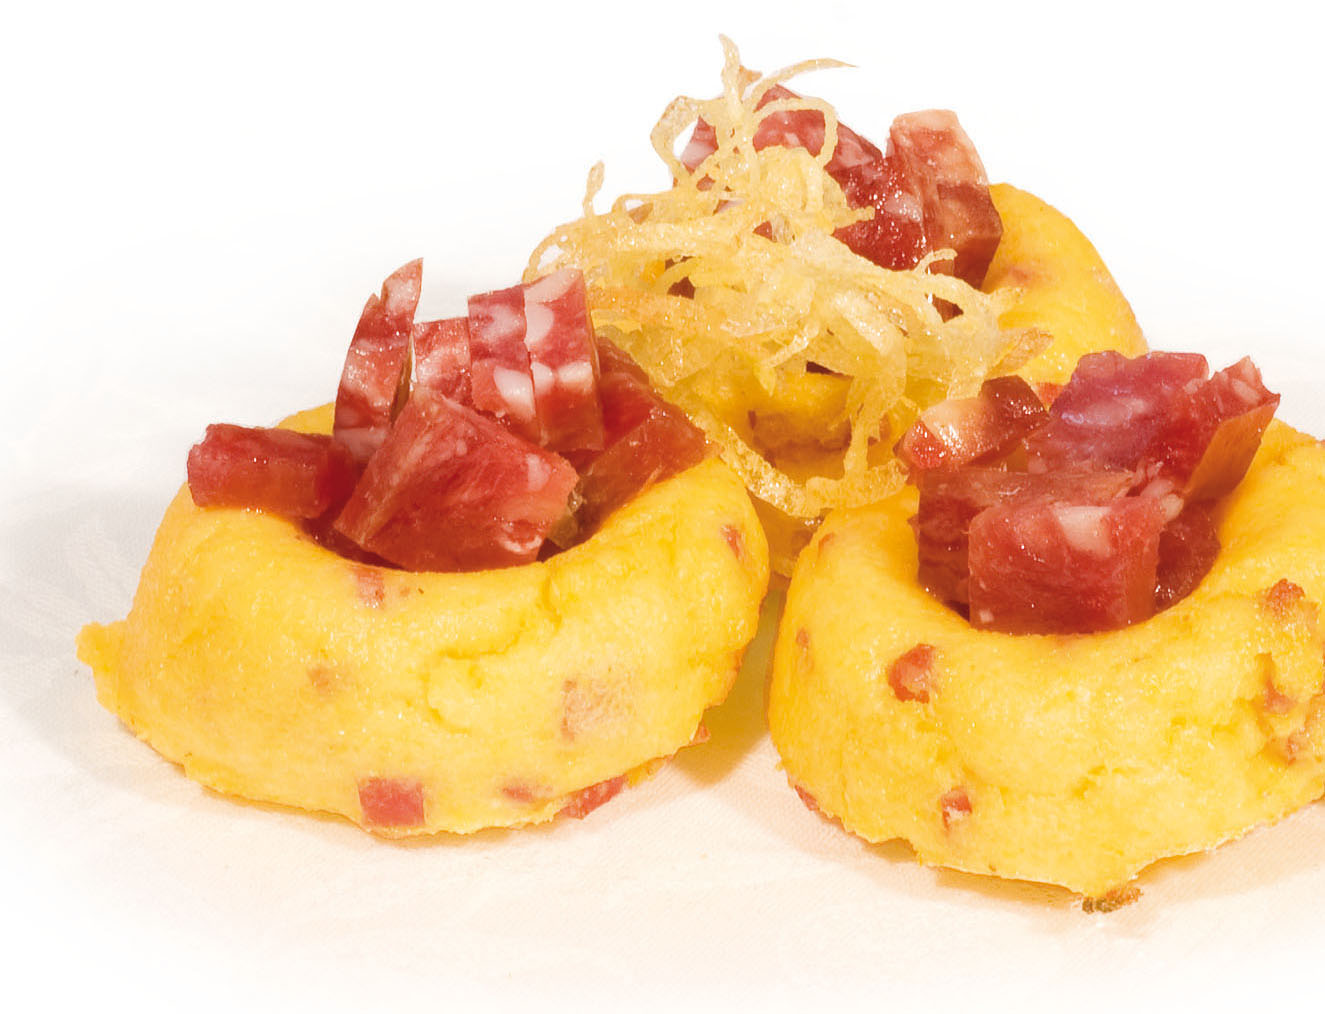 Small slices of gratinated “Polenta” with “Padus” salami cut into small cubes